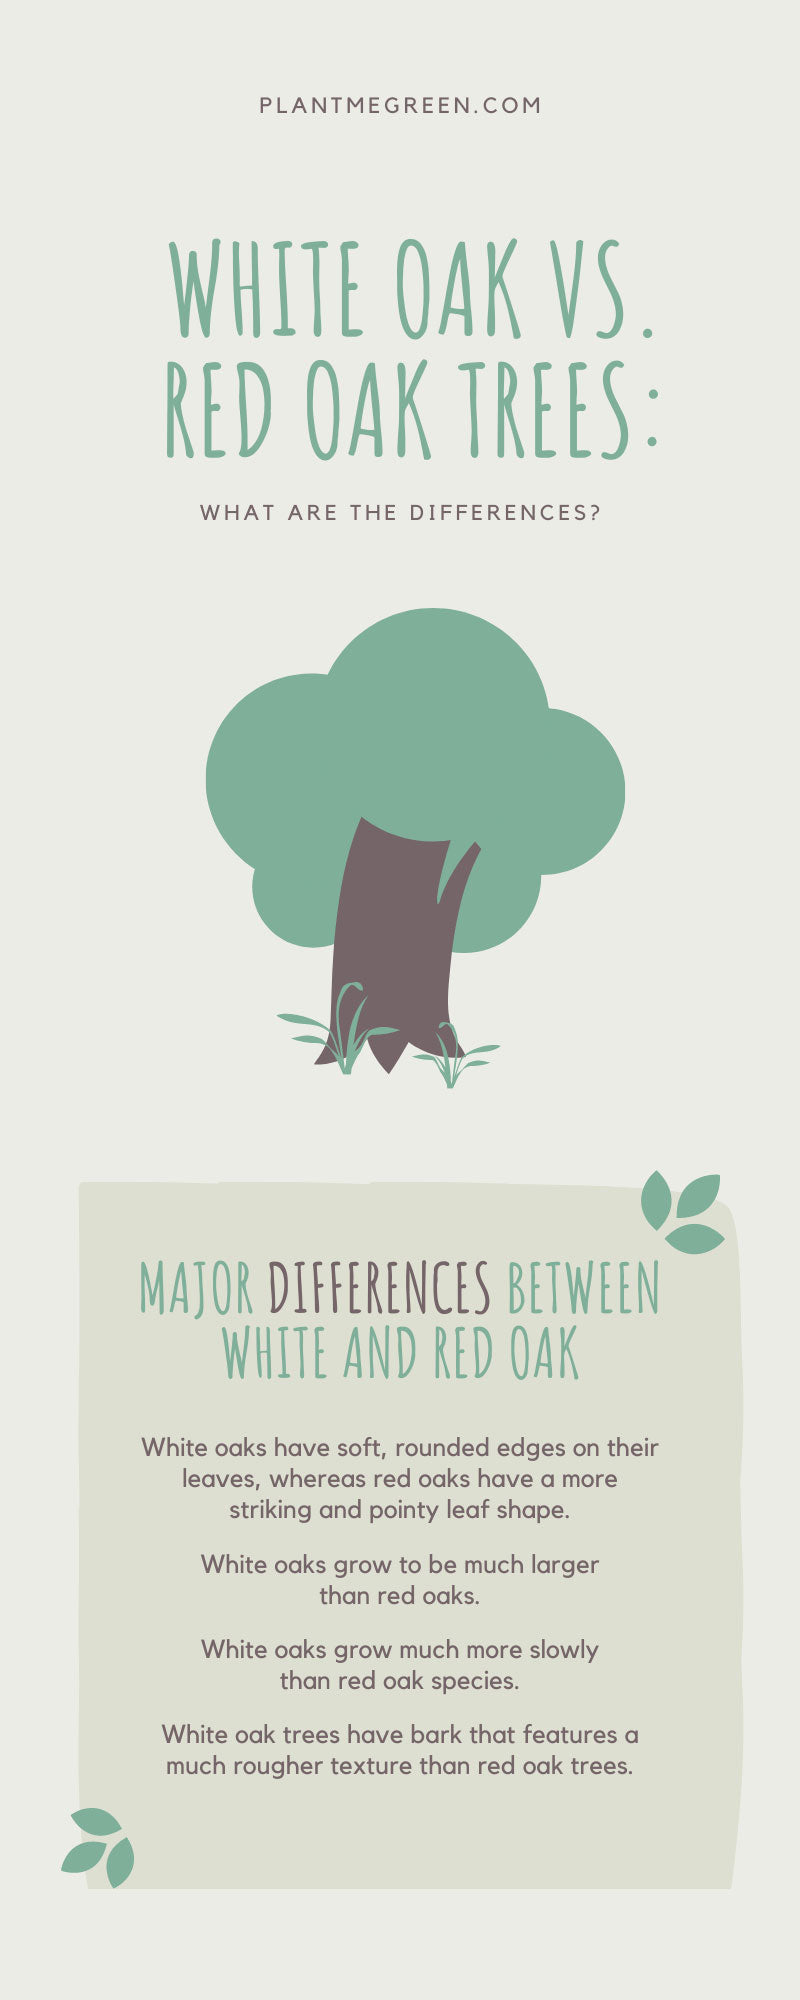 White Oak vs. Red Oak Trees: What Are the Differences?